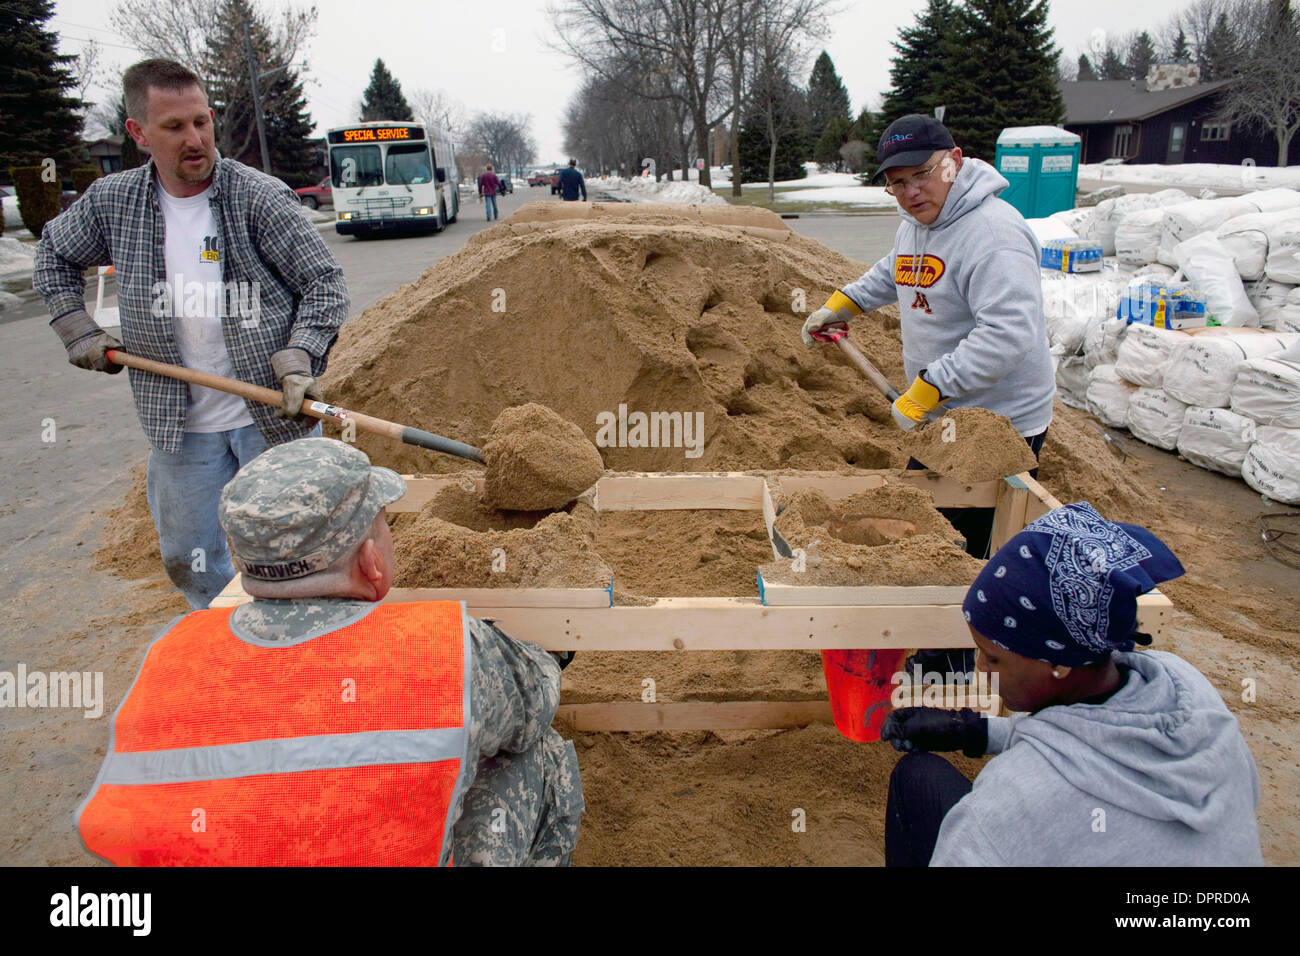 March 22, 2009 - Moorhead, Minnesota, USA - MATT CODGILL, left, of Fargo, N.D. and TIM ZOERNER, right, of Moorhead, Minn. fill sandbags with other volunteers and Minnesota Army National Guard troops in a neighborhood along the Red River in Moorhead, Minn. The Red River along the North Dakota and Minnesota border is expected to crest at or near record levels in the coming week. Resi Stock Photo